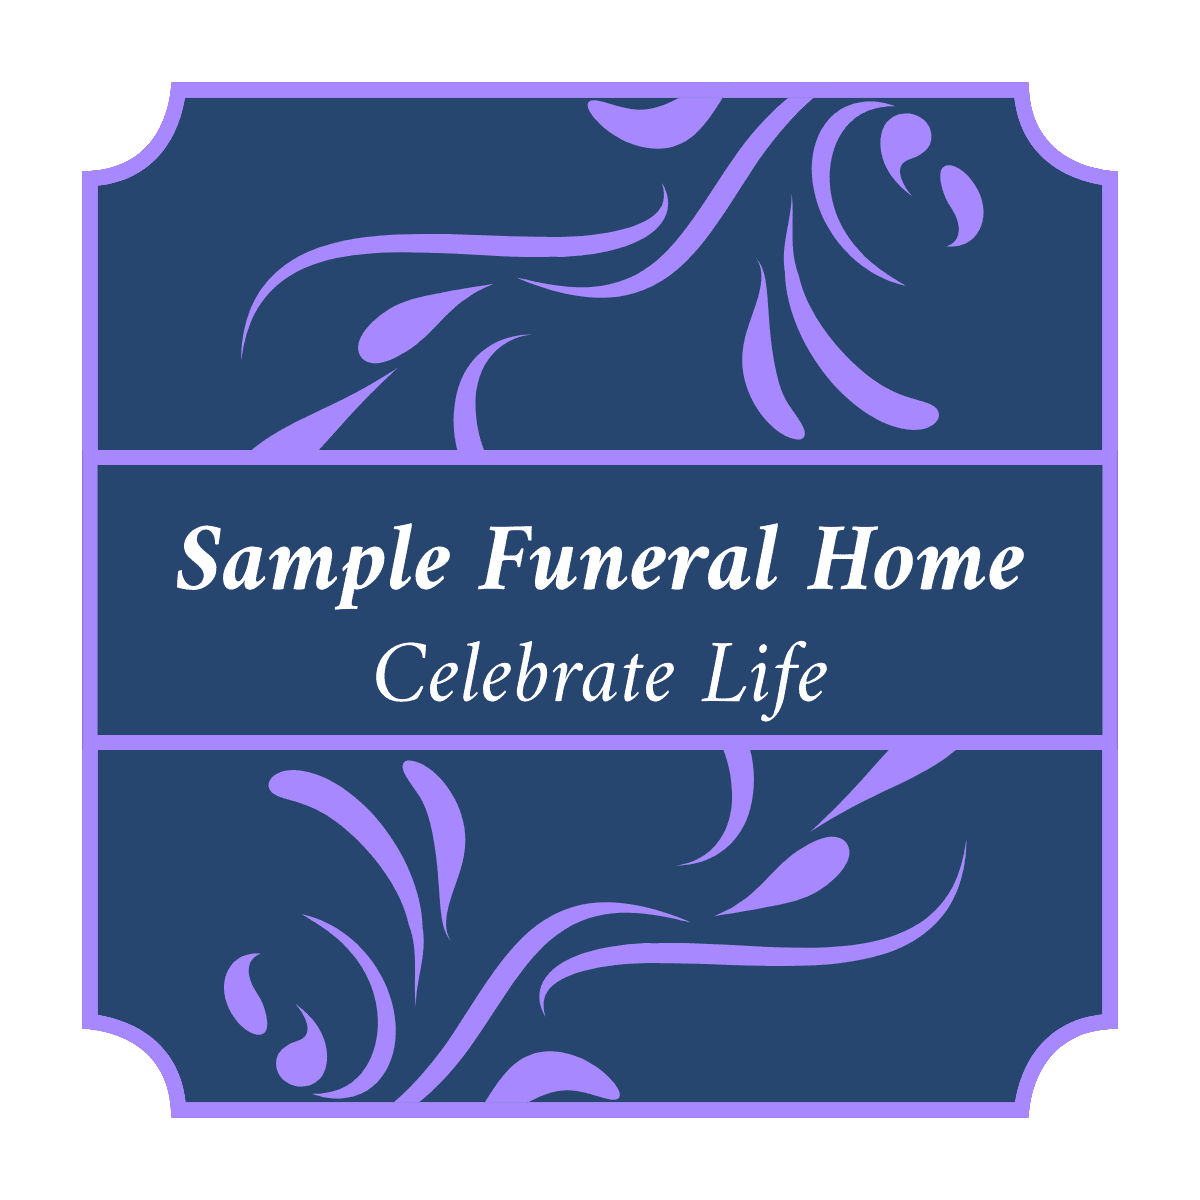 Generic funeral home logo. The name of the funeral home in the center with the phase, Celebrate Life, in the middle. Several classical embelishments surround the words.